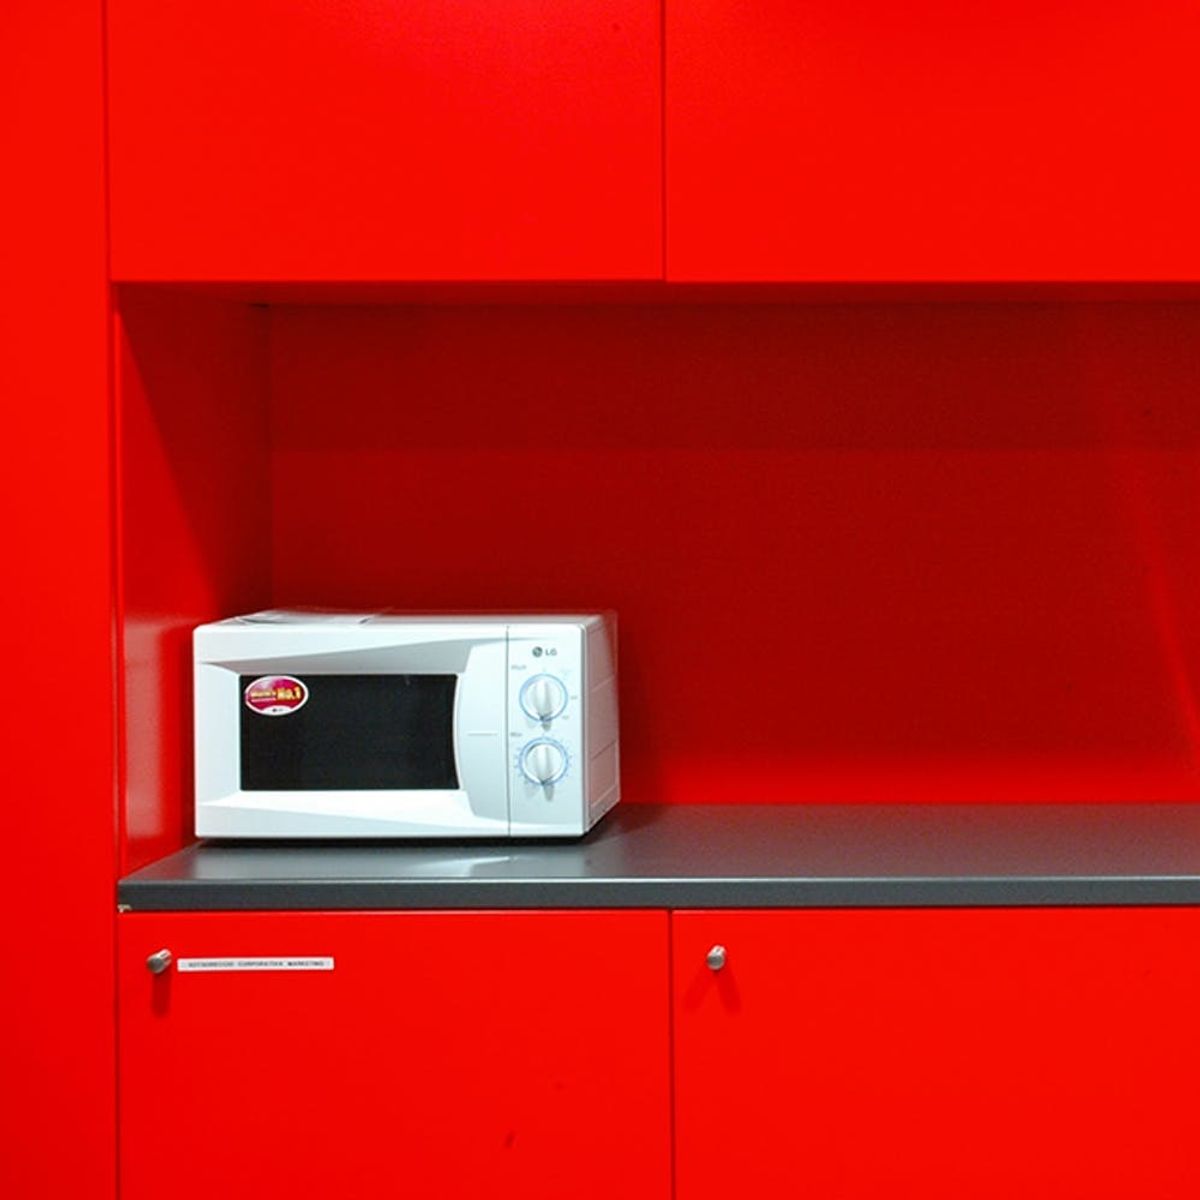 You’re Going to Want a New Microwave After Reading This